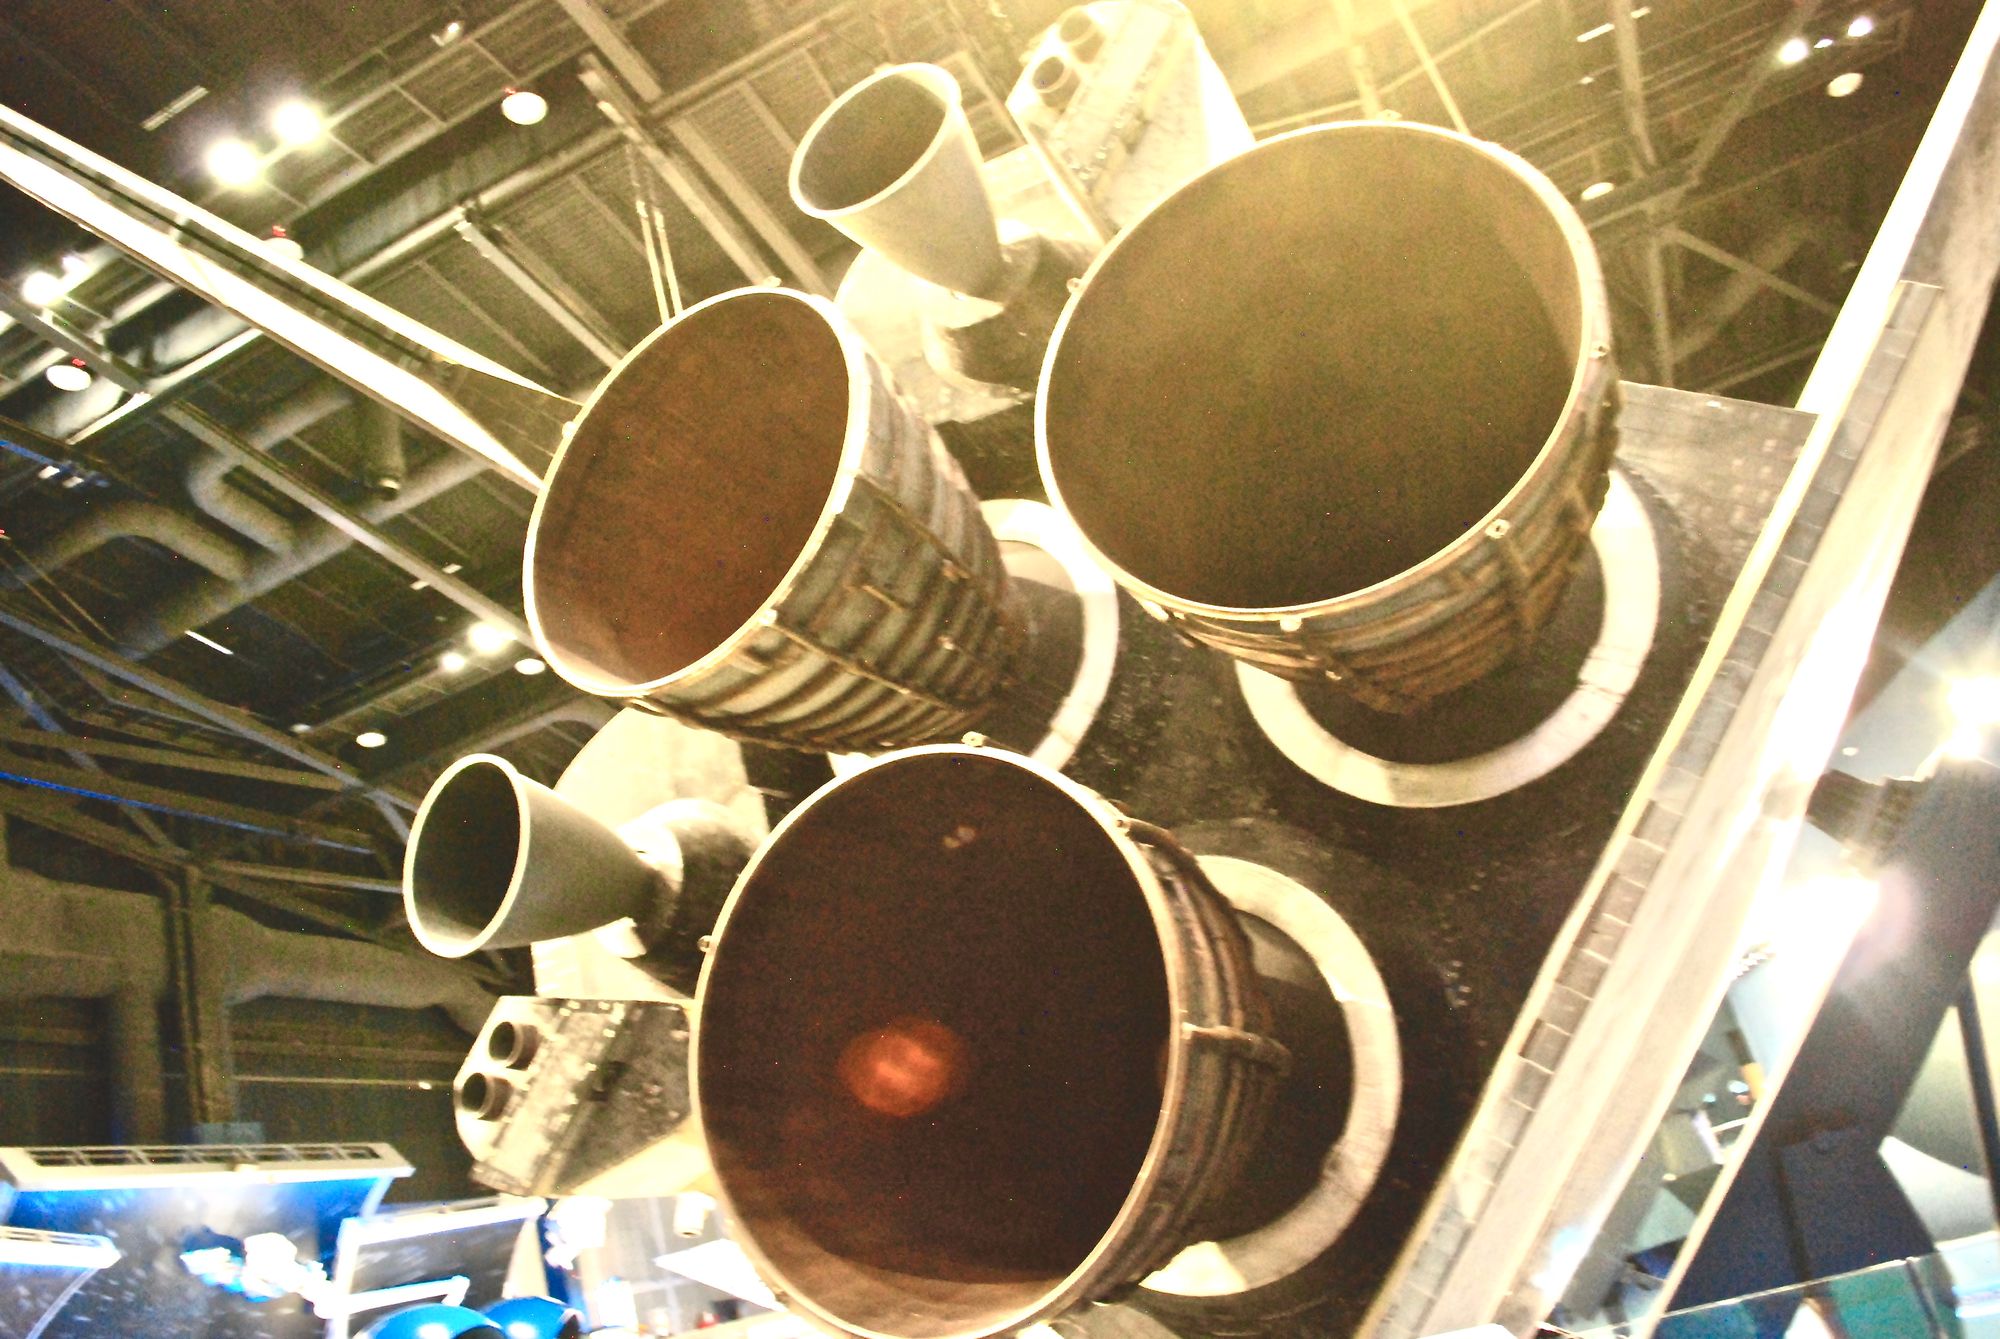 Why The Preschooler In You Will Love a Trip to The Kennedy Space Center